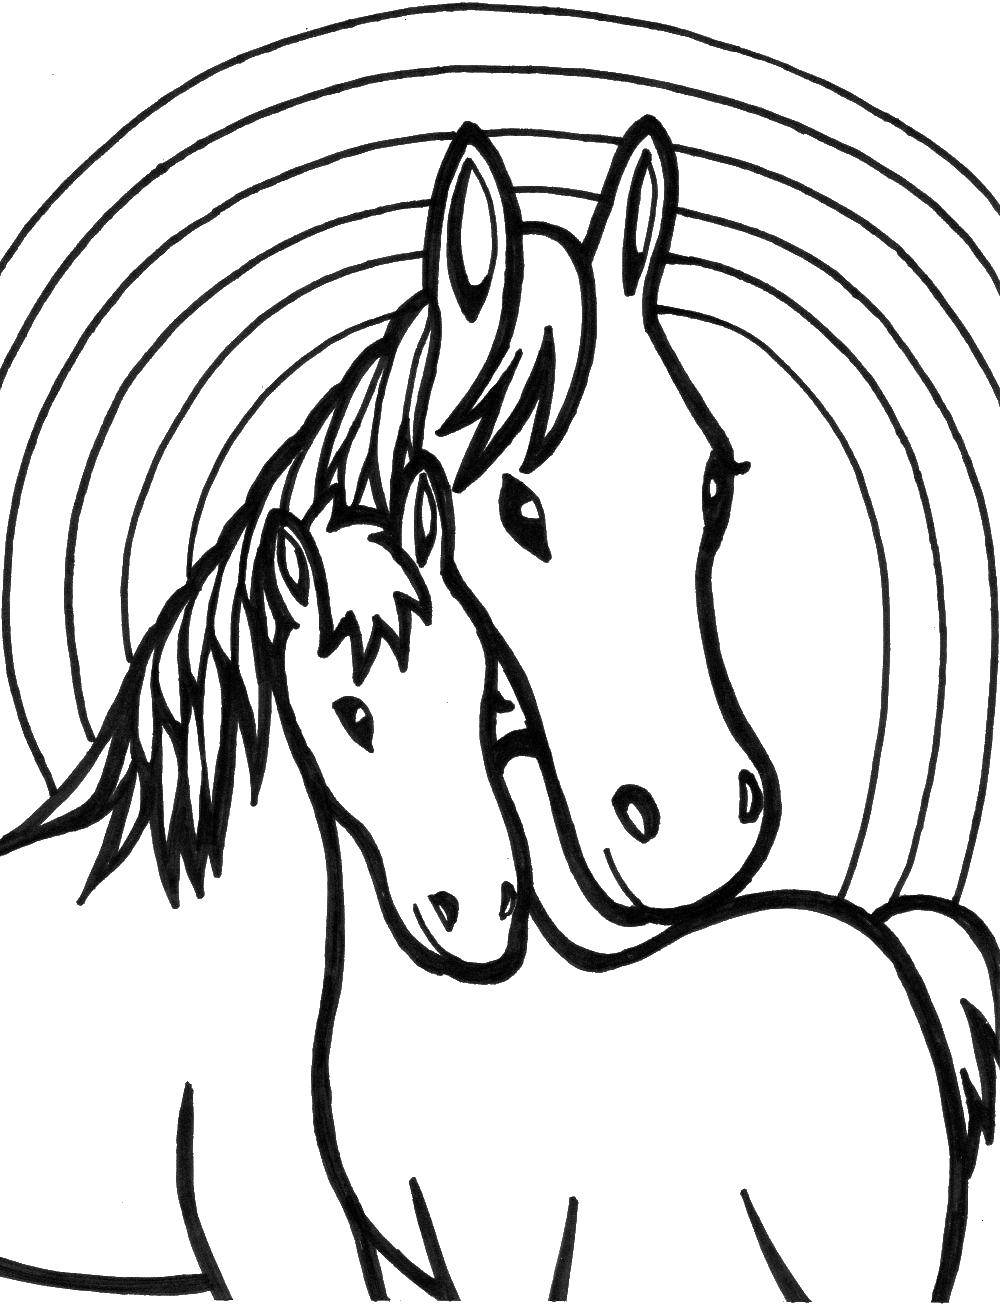 Coloring Two horses. Category horse. Tags:  horses, animals, horse, foal.